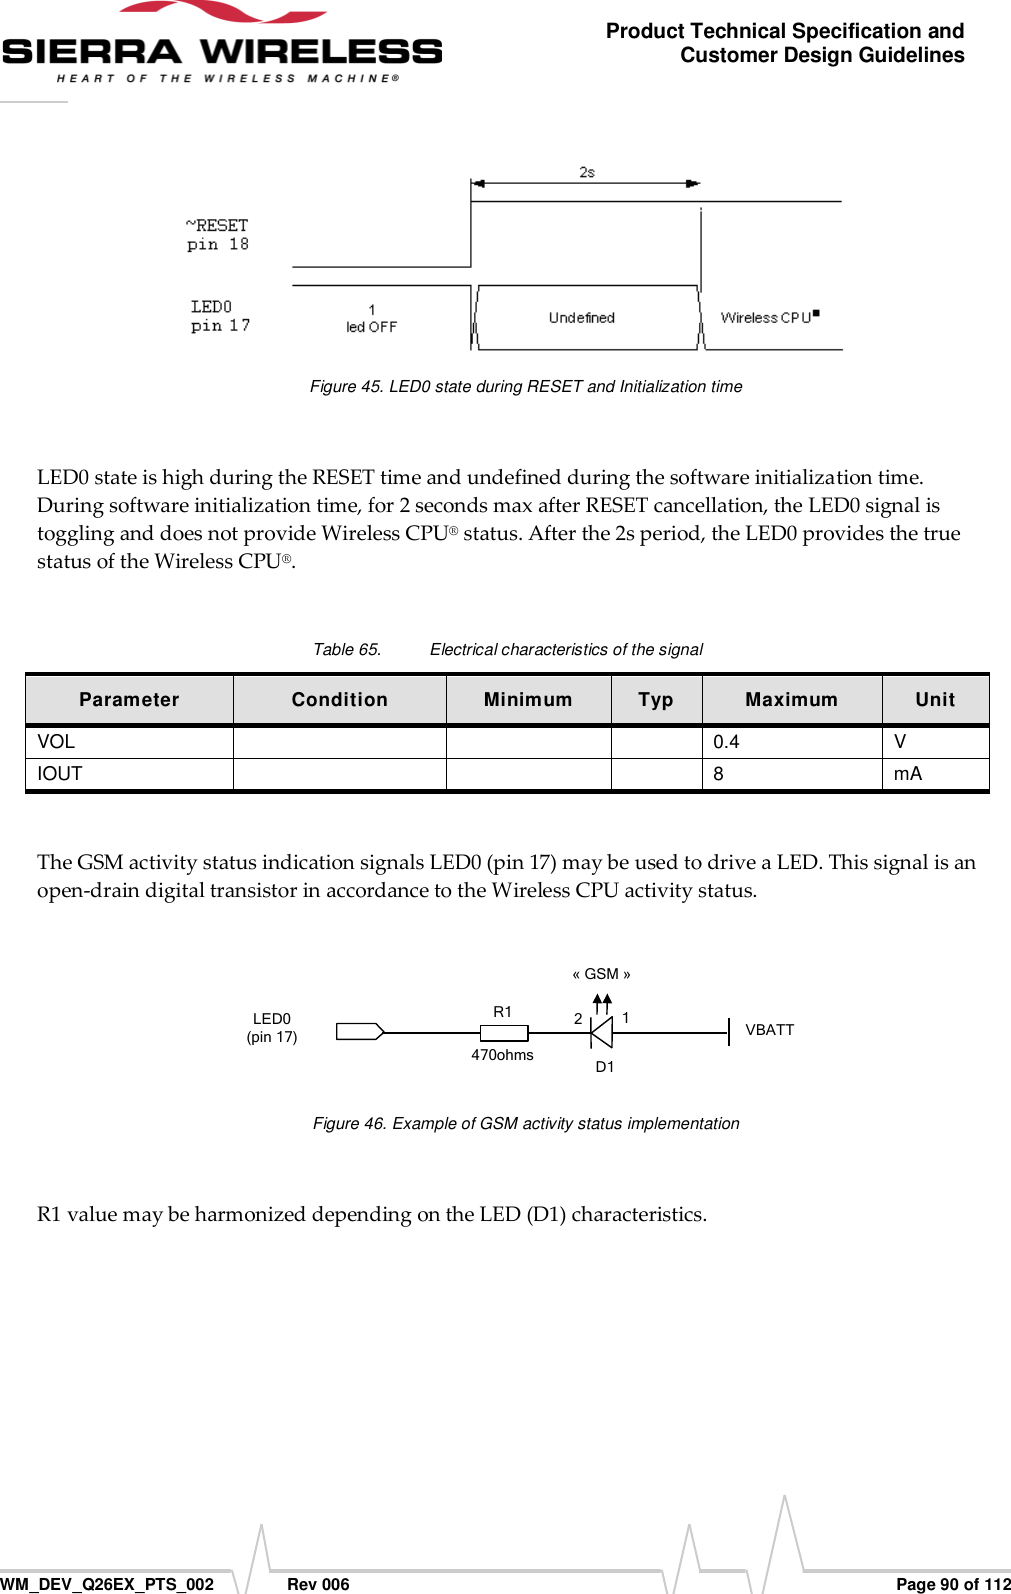      WM_DEV_Q26EX_PTS_002  Rev 006  Page 90 of 112 Product Technical Specification and Customer Design Guidelines  Figure 45. LED0 state during RESET and Initialization time  LED0 state is high during the RESET time and undefined during the software initialization time. During software initialization time, for 2 seconds max after RESET cancellation, the LED0 signal is toggling and does not provide Wireless CPU® status. After the 2s period, the LED0 provides the true status of the Wireless CPU®.  Table 65.  Electrical characteristics of the signal Parameter Condition Minimum Typ Maximum Unit VOL    0.4 V IOUT    8 mA  The GSM activity status indication signals LED0 (pin 17) may be used to drive a LED. This signal is an open-drain digital transistor in accordance to the Wireless CPU activity status.  LED0(pin 17)VBATT« GSM »D11 2 R1   470ohms  Figure 46. Example of GSM activity status implementation  R1 value may be harmonized depending on the LED (D1) characteristics.  